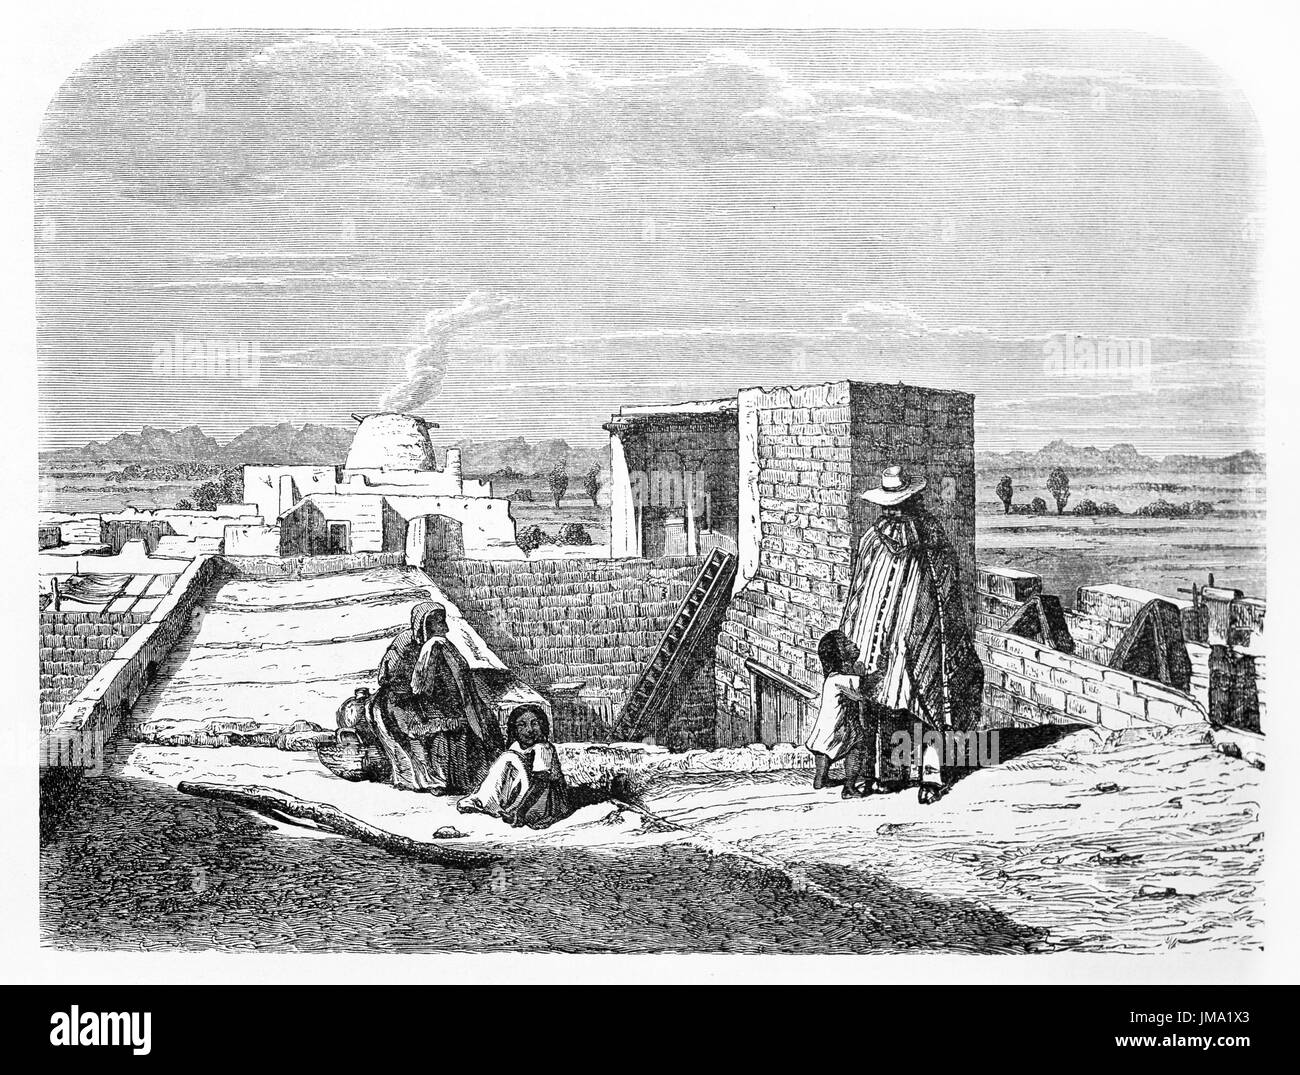 Old illustration of an house terrace in Corallitos, Chihuahua state, Mexico. Created by Marand, published on Le Tour du Monde, Paris, 1861. Stock Photo